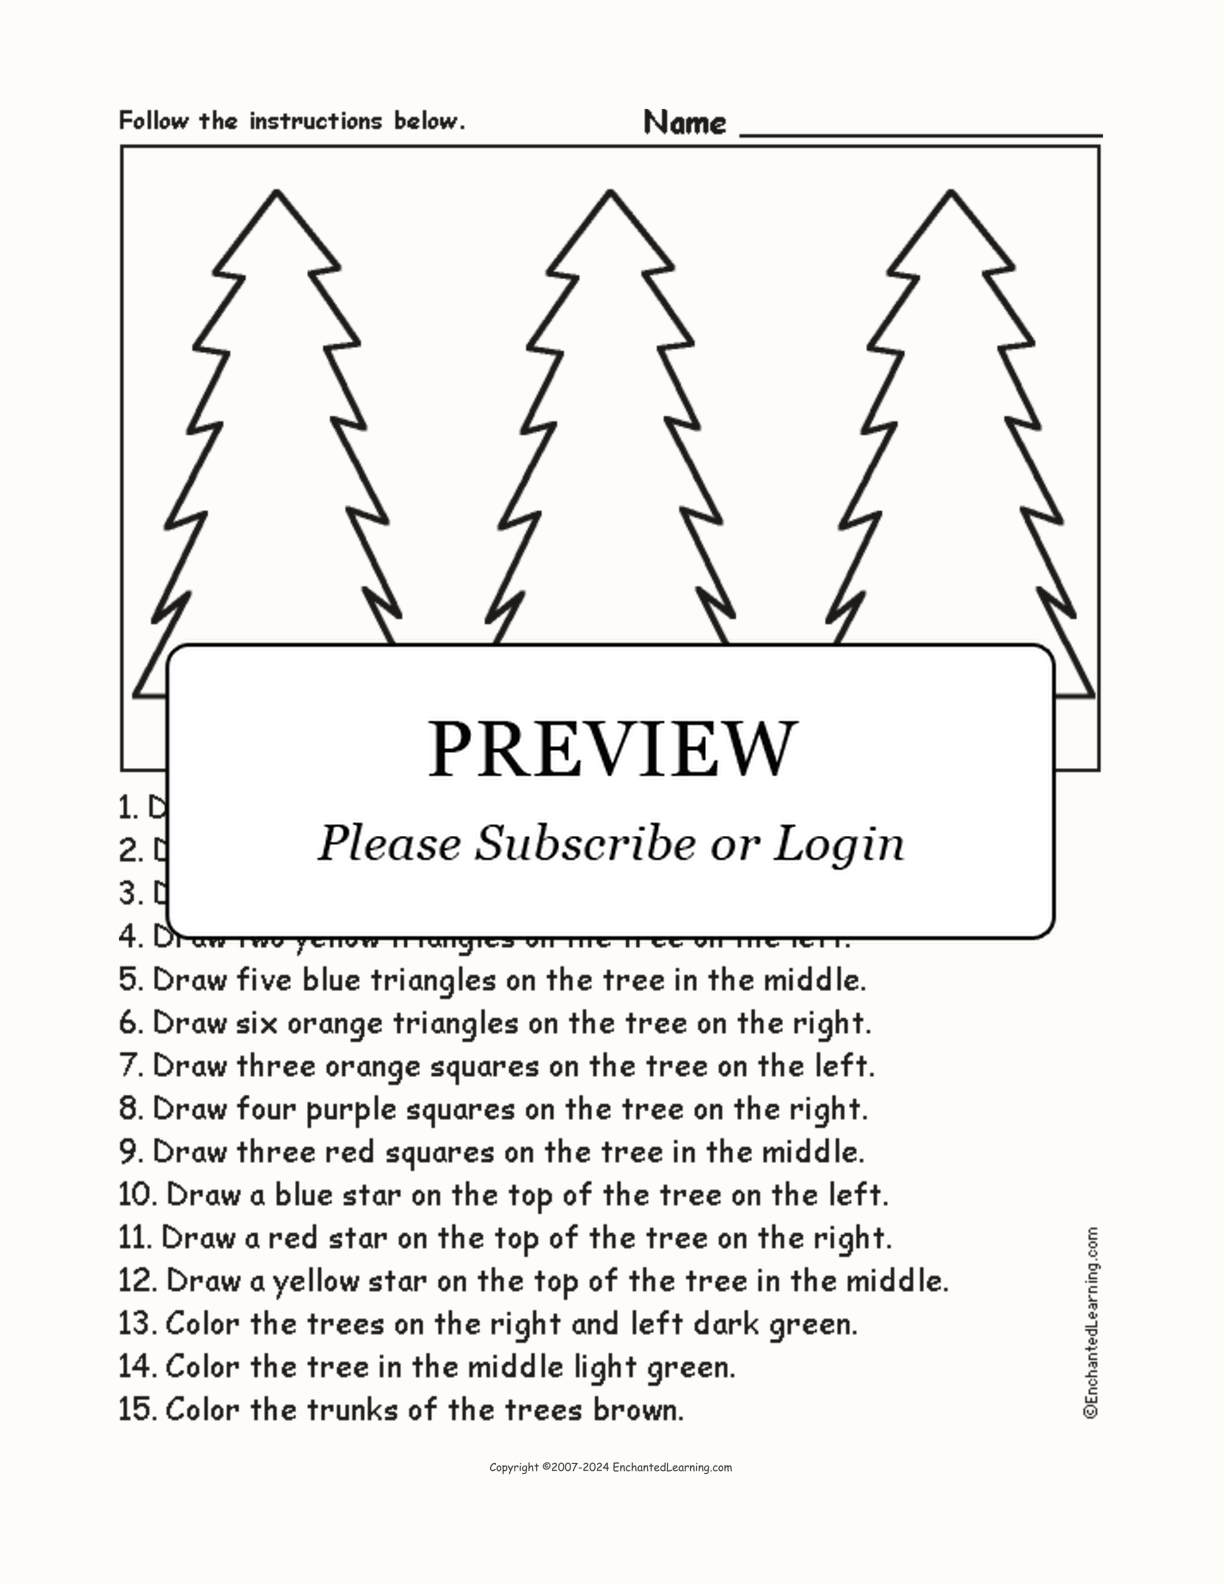 Evergreen Trees - Follow the Instructions interactive worksheet page 1